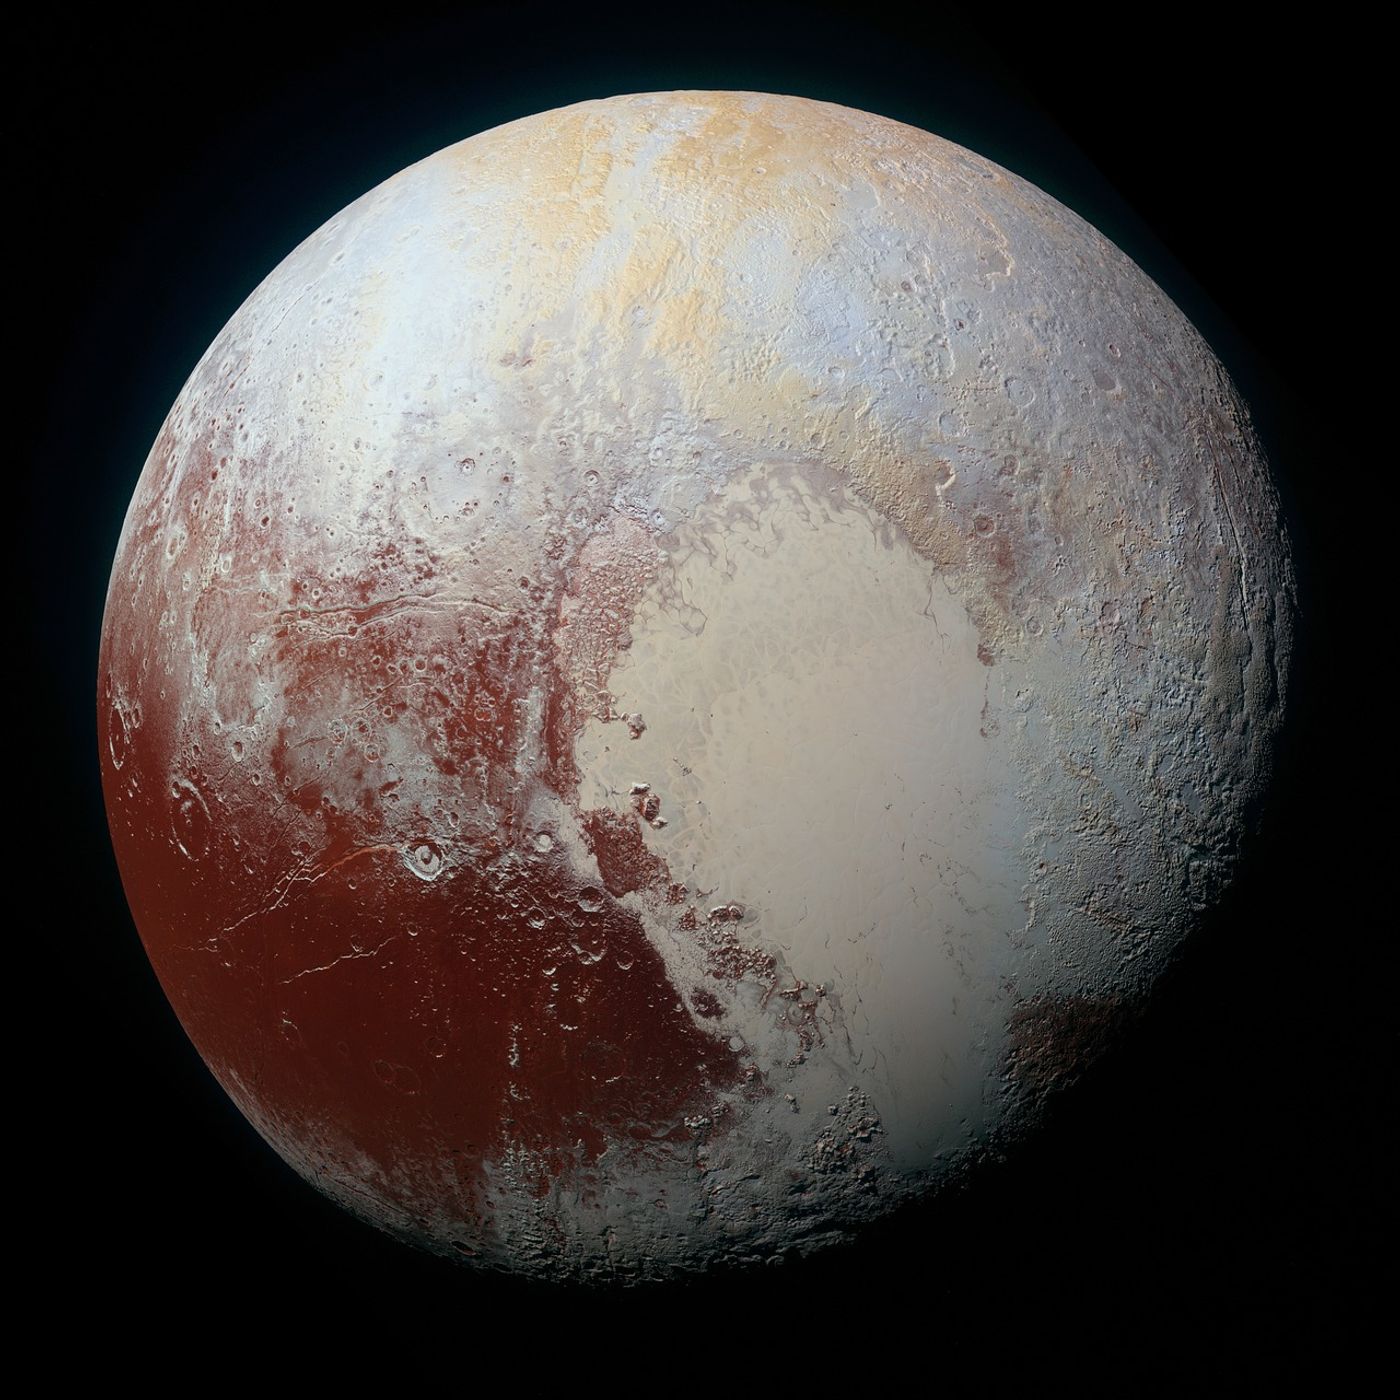 This image shows the brown and red deposits al over Pluto's surface.